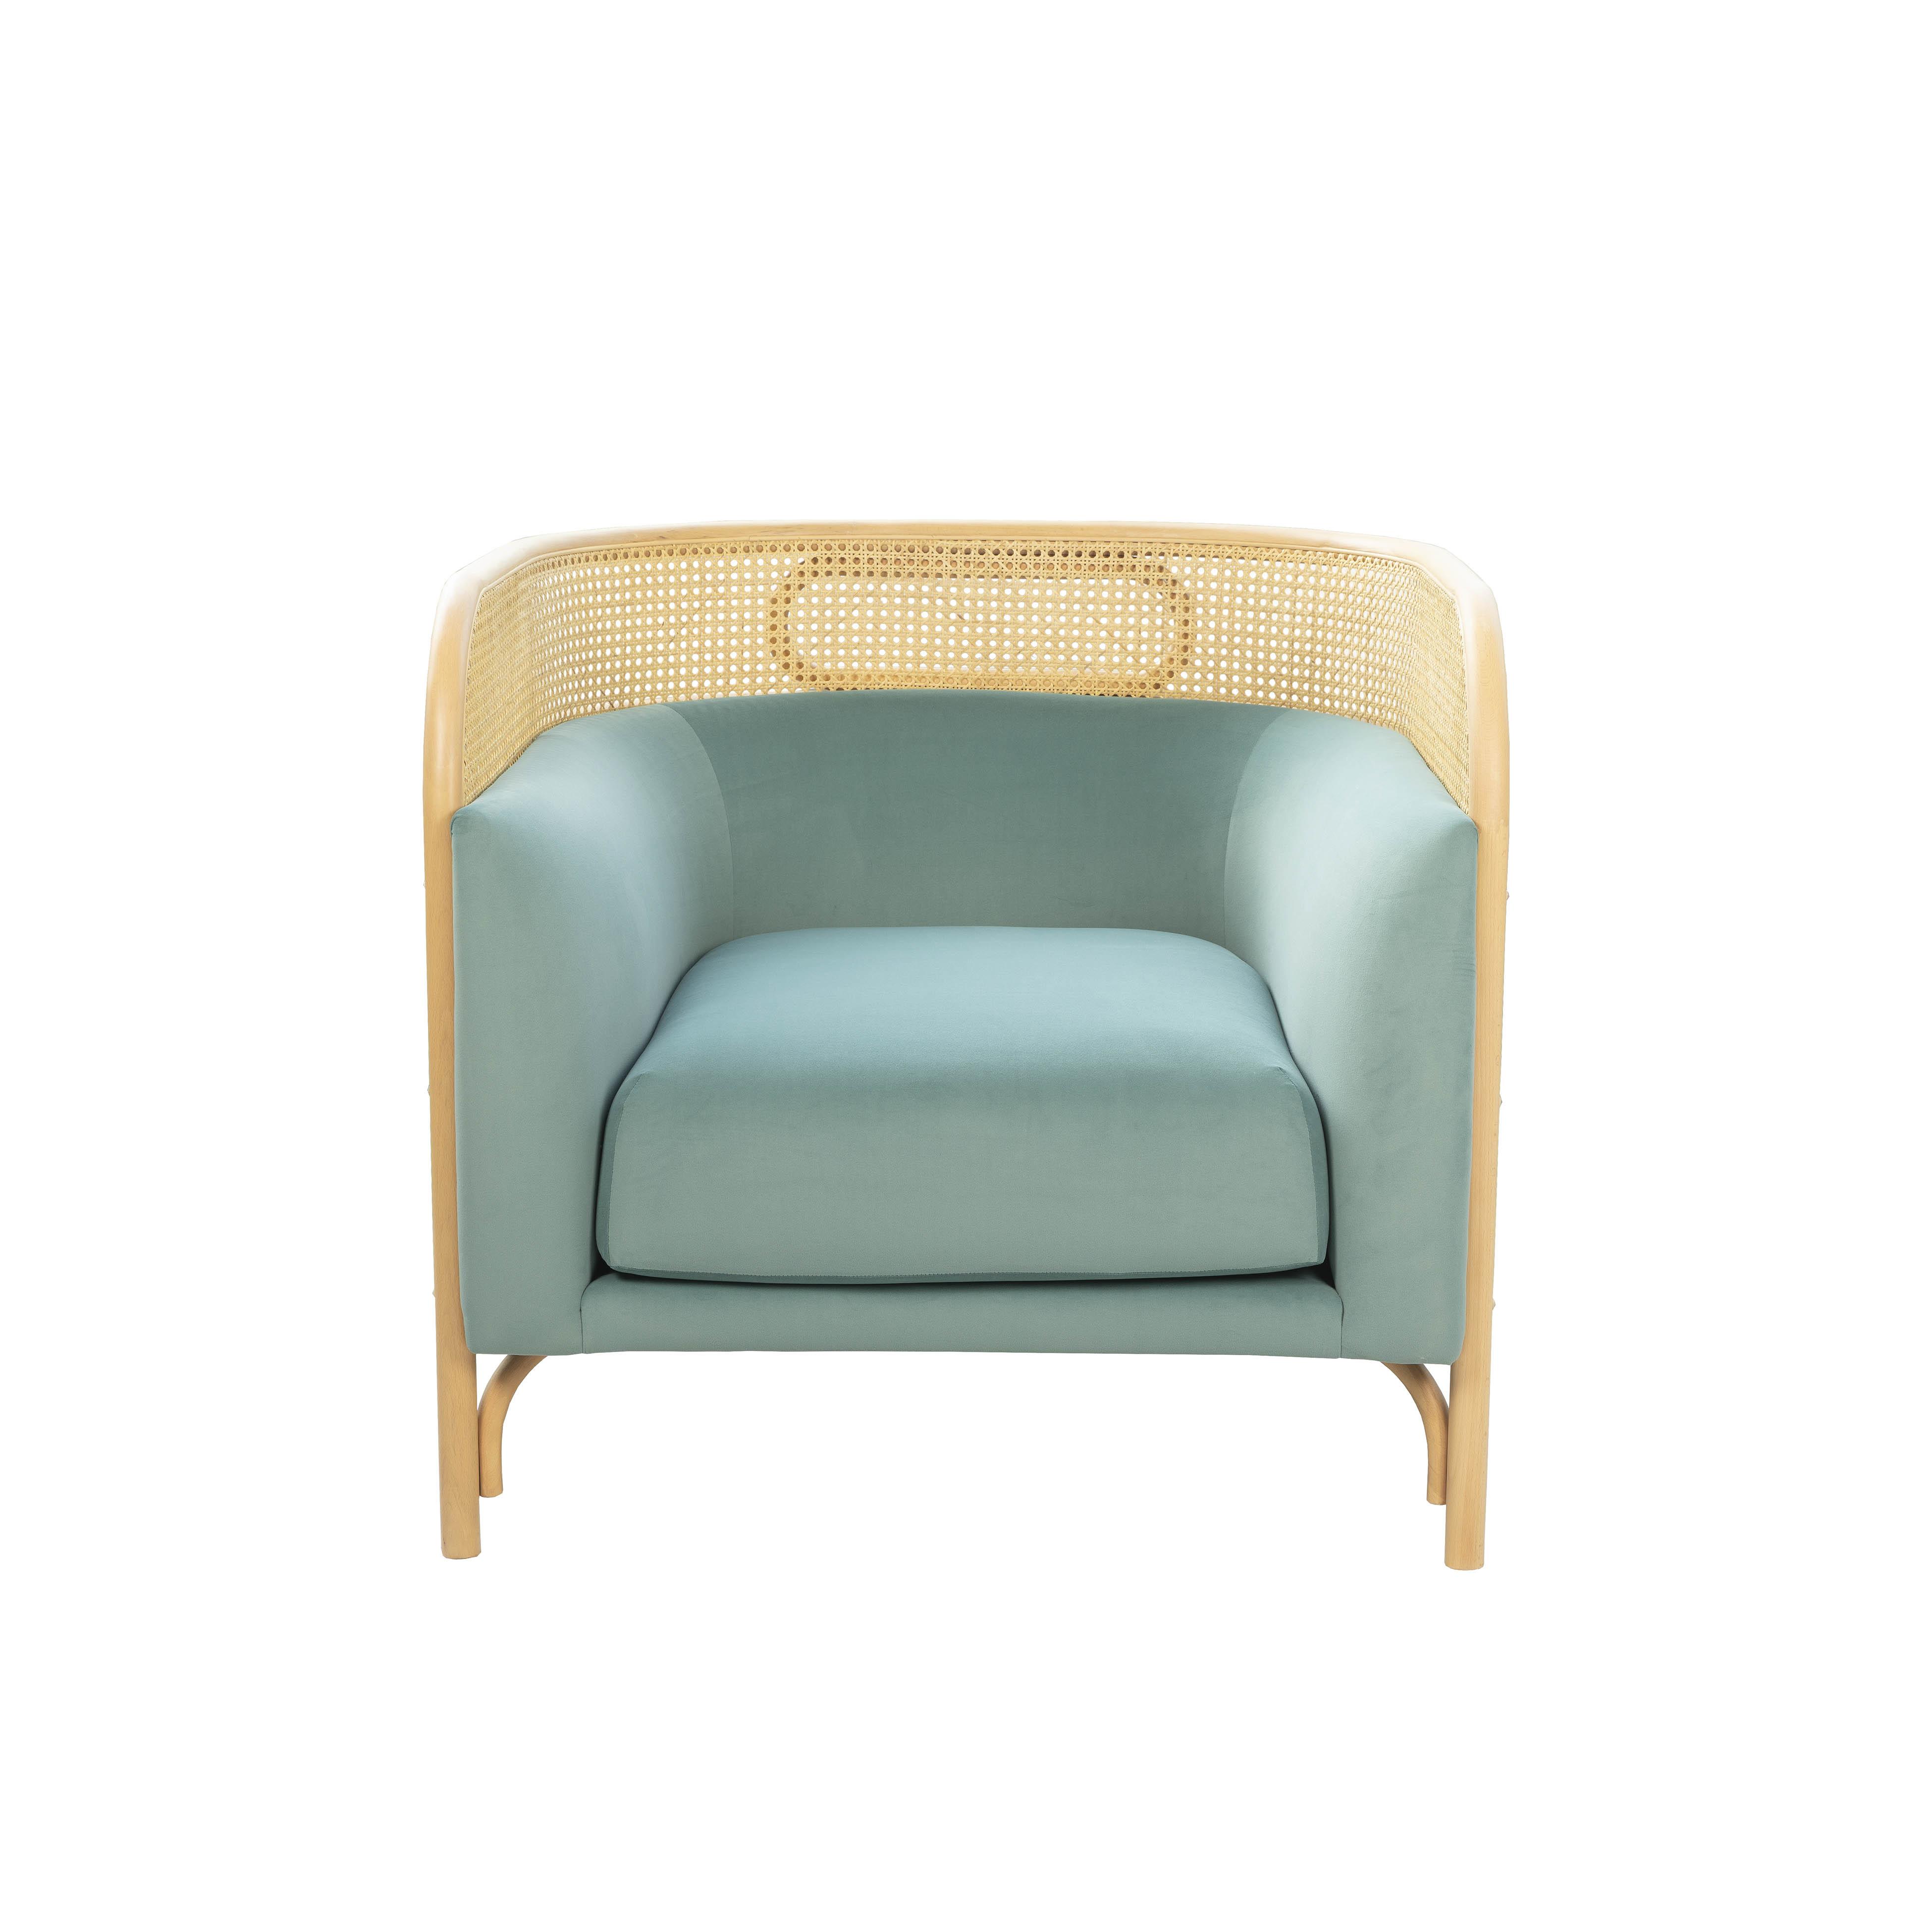 Magnolia Sea Blue Velvet Chair With Gold Base